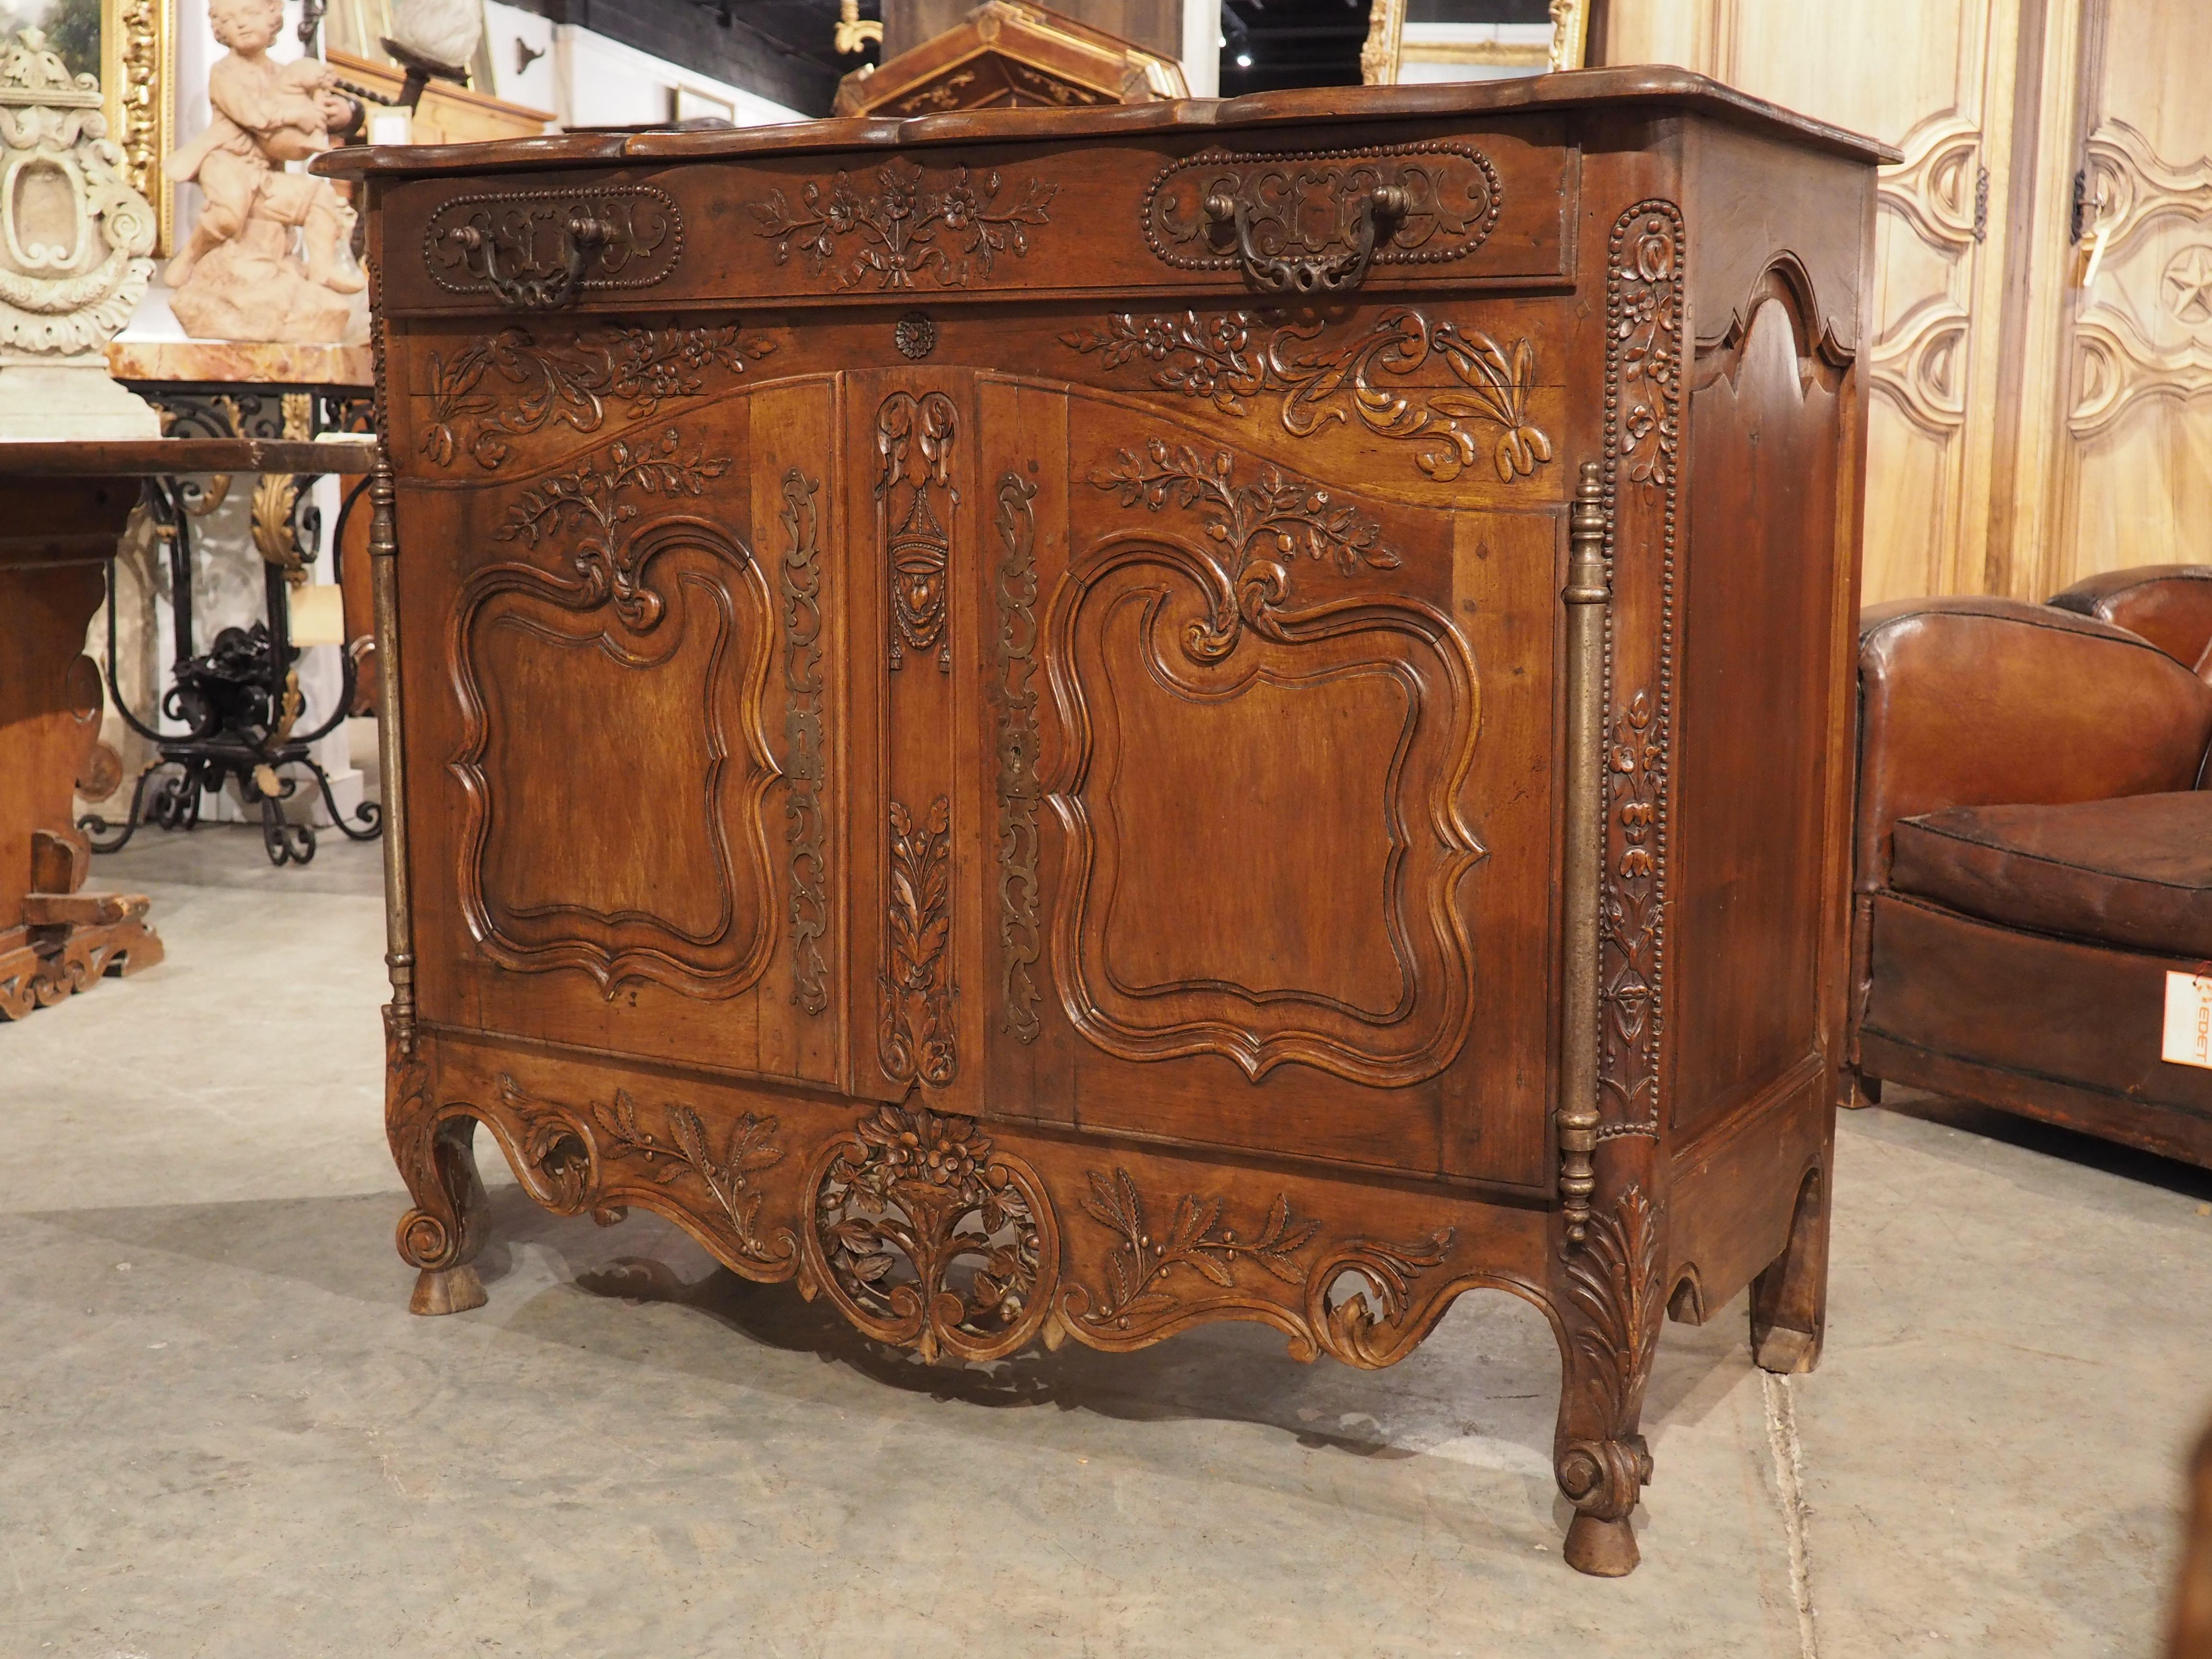 Buffets from Provence have a distinct style, often featuring carved motifs relating to nature and agriculture. This walnut buffet from the 1800s is no exception, as noted by the highly detailed apron, which is highlighted by a pierced bouquet